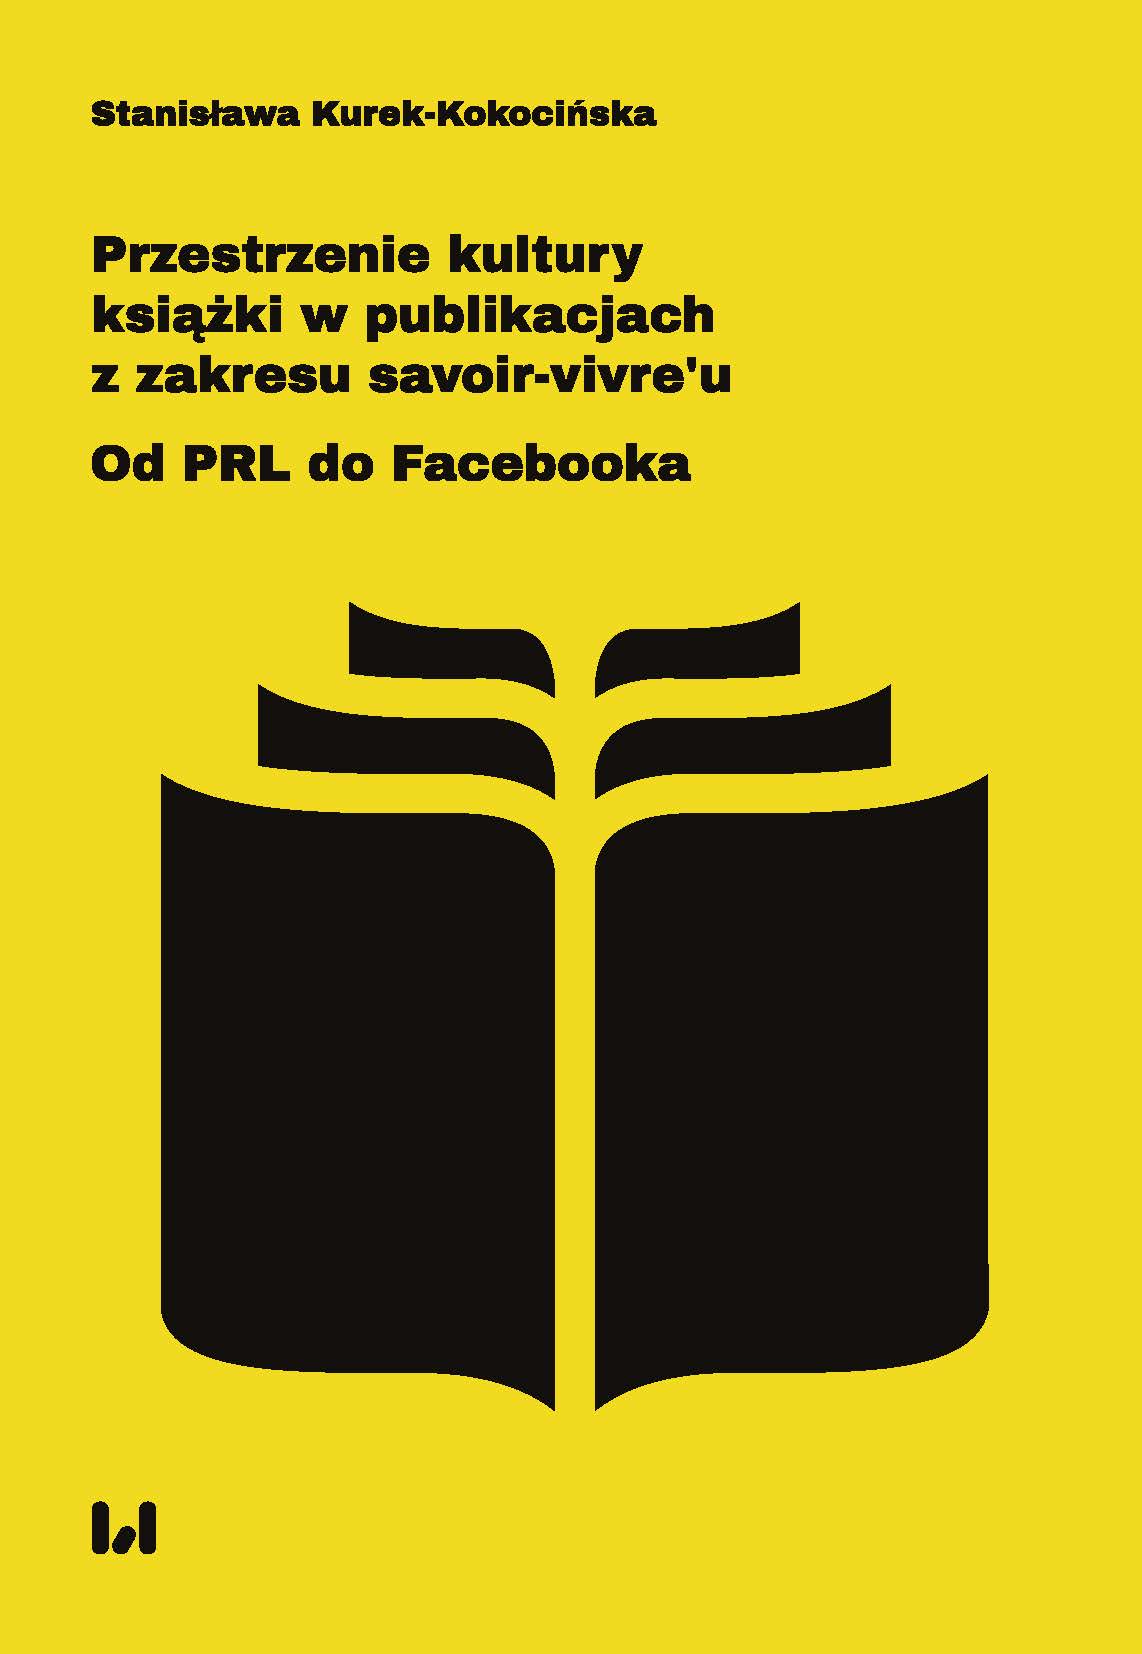 The areas of book culture in the light of savoir-vivre publications. From Polish People’s Republic (PRL) to Facebook Cover Image